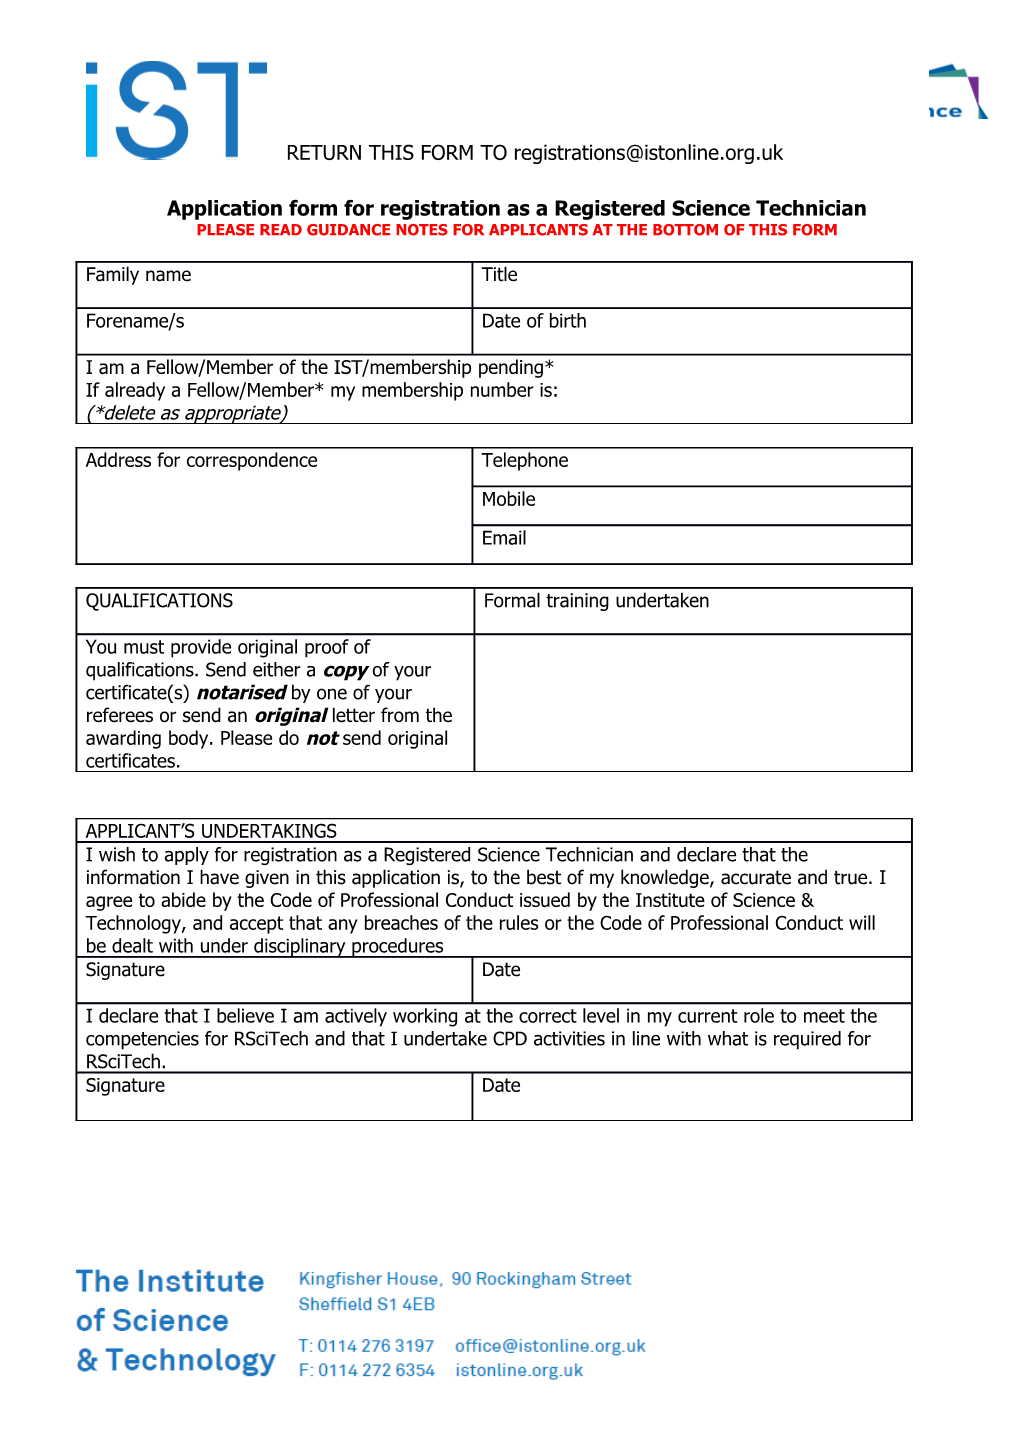 Application Form for Registration As a Registered Science Technician